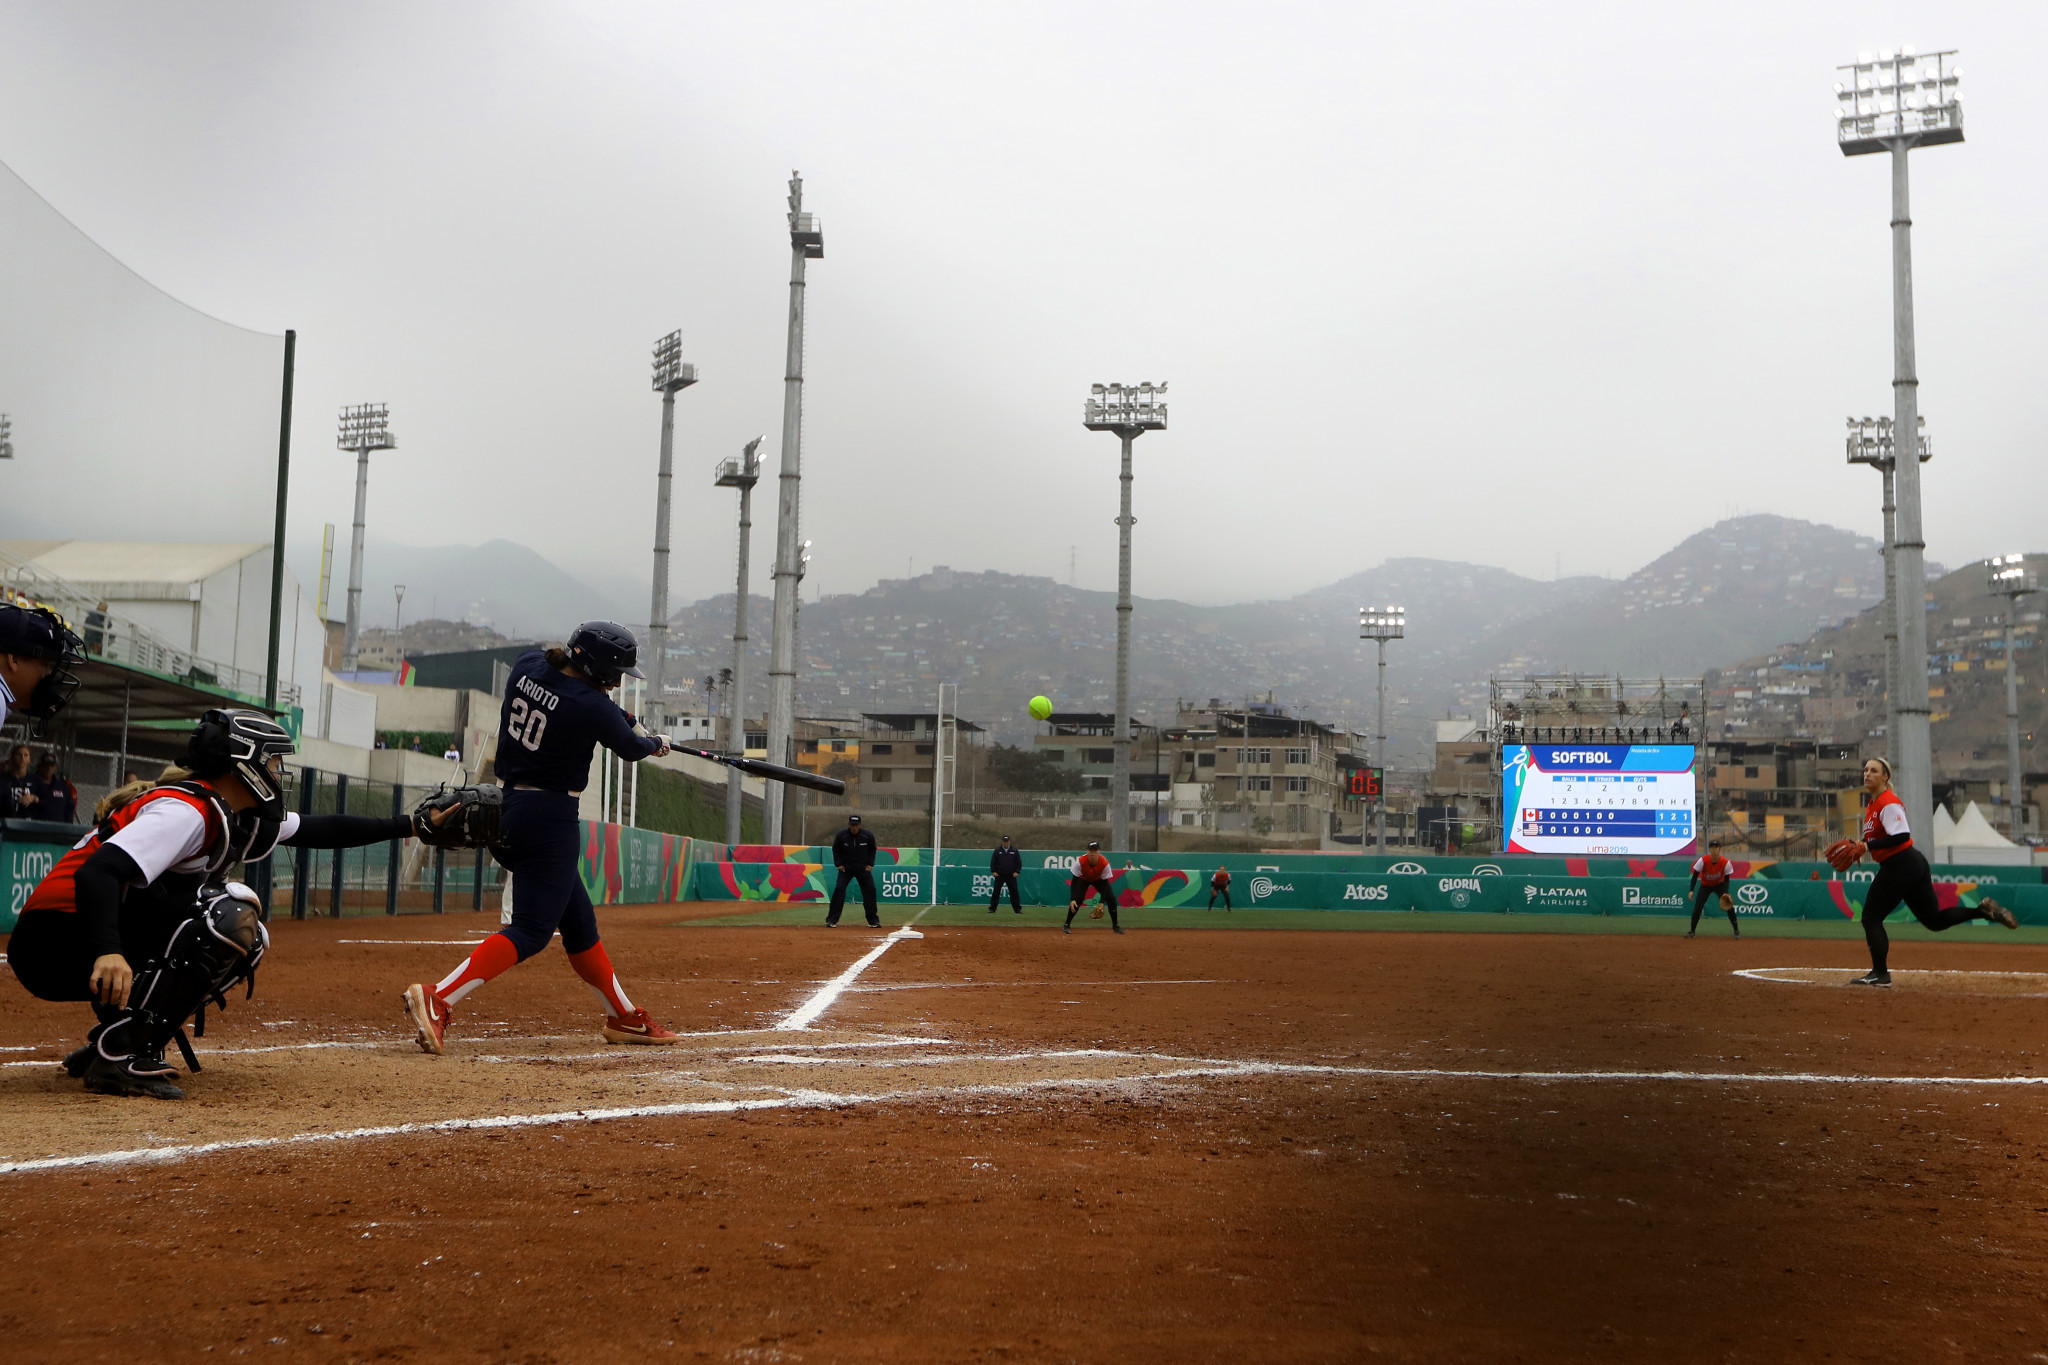 The Villa Maria del Triunfo complex hosted softball at the Lima 2019 Pan American Games ©Getty Images